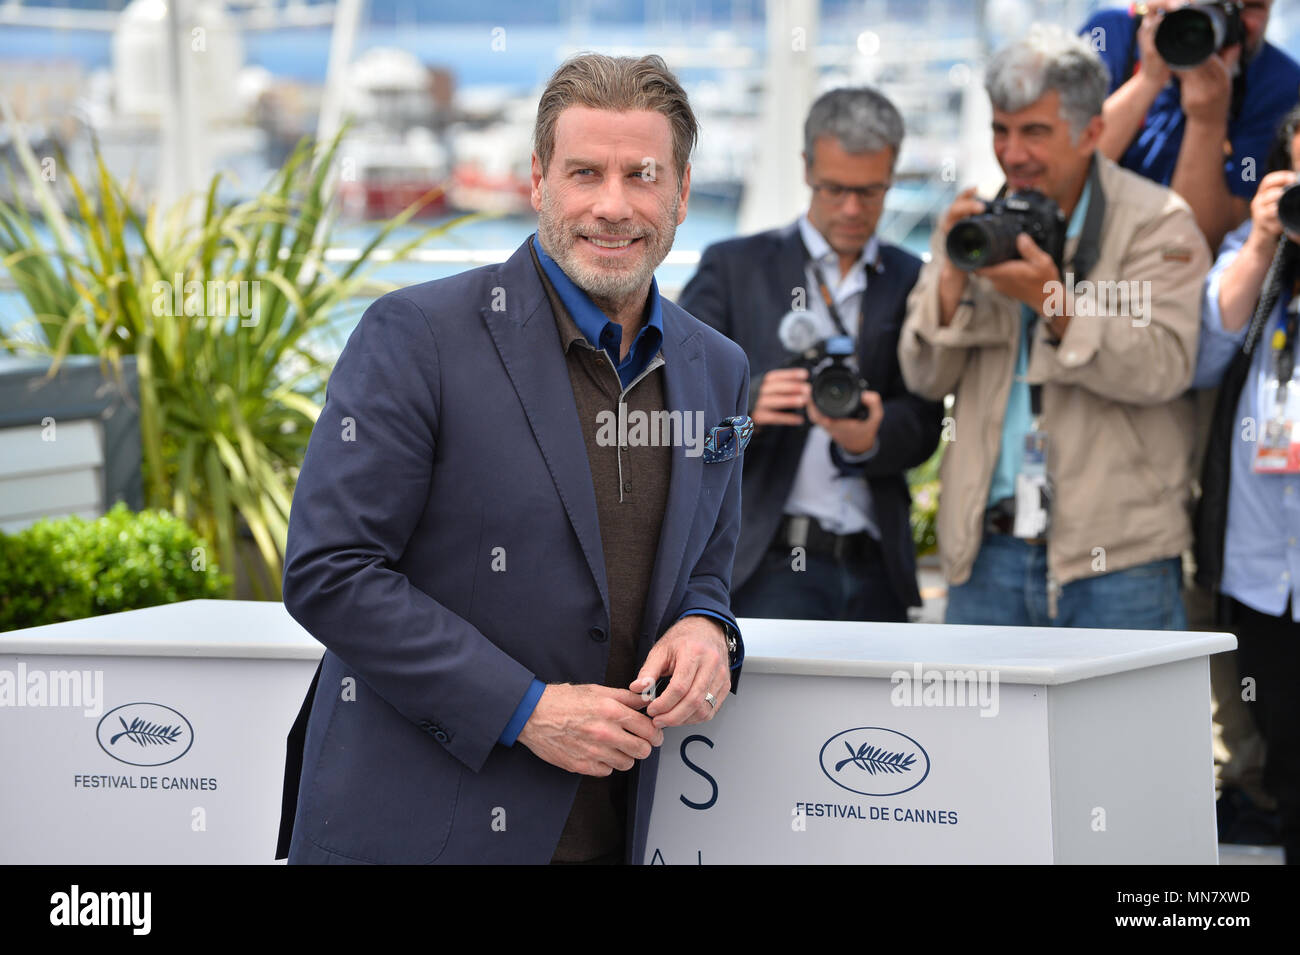 Cannes, France. 15th May, 2018. CANNES, FRANCE. May 15, 2018: John Travolta at the photocall for 'Gotti' at the 71st Festival de Cannes Picture Credit: Sarah Stewart/Alamy Live News Stock Photo